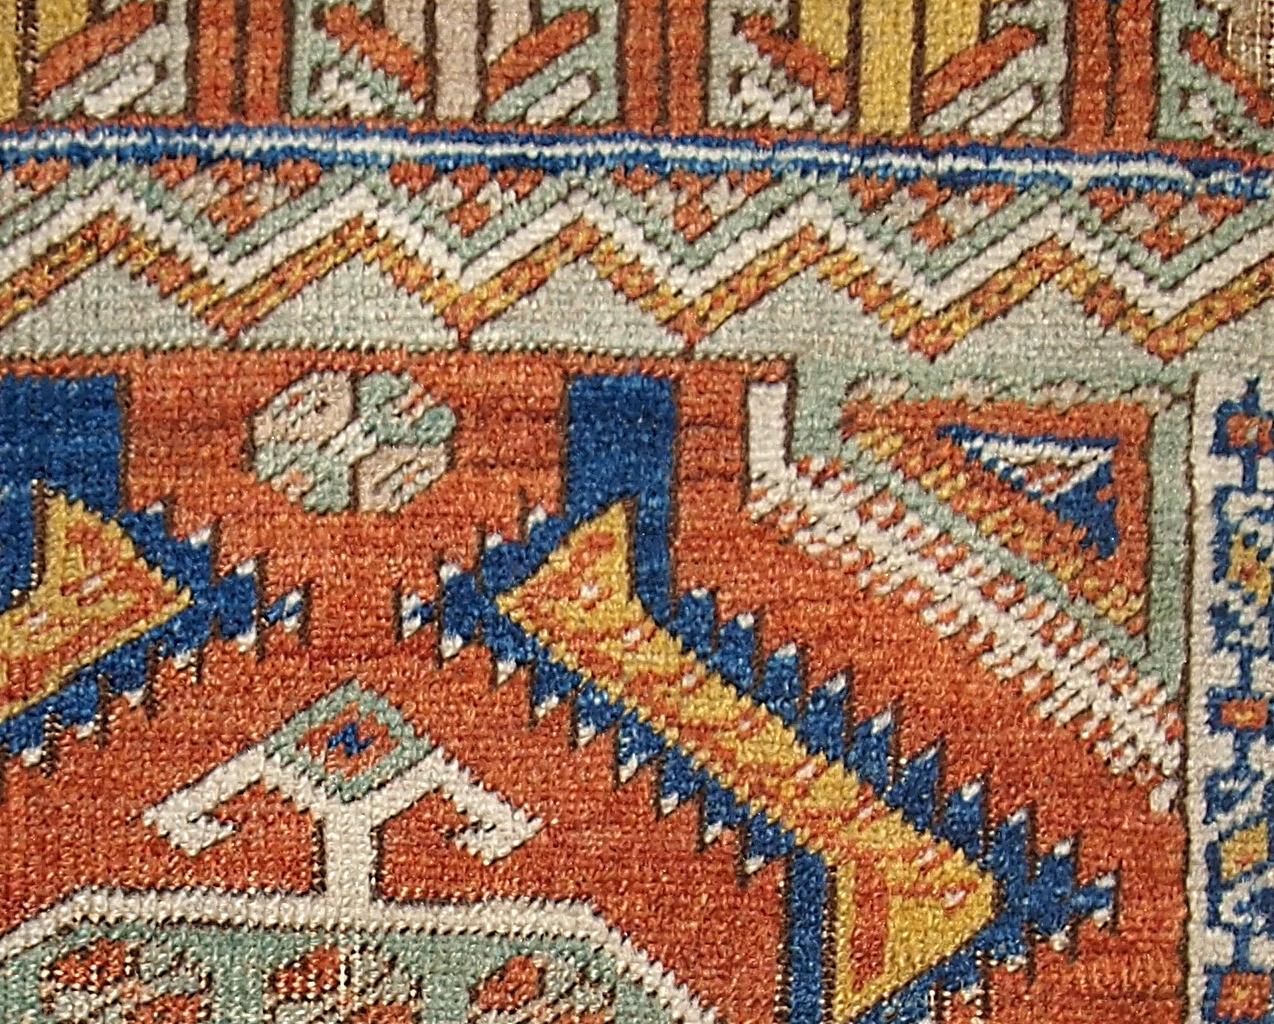 Antique collectible Turkish Yastik rug. This rug has bright orange field with geometrically designed elements in yellow and blue shades. The center and two end are in light green color. The borders are beige. Beautiful little masterpiece.
 